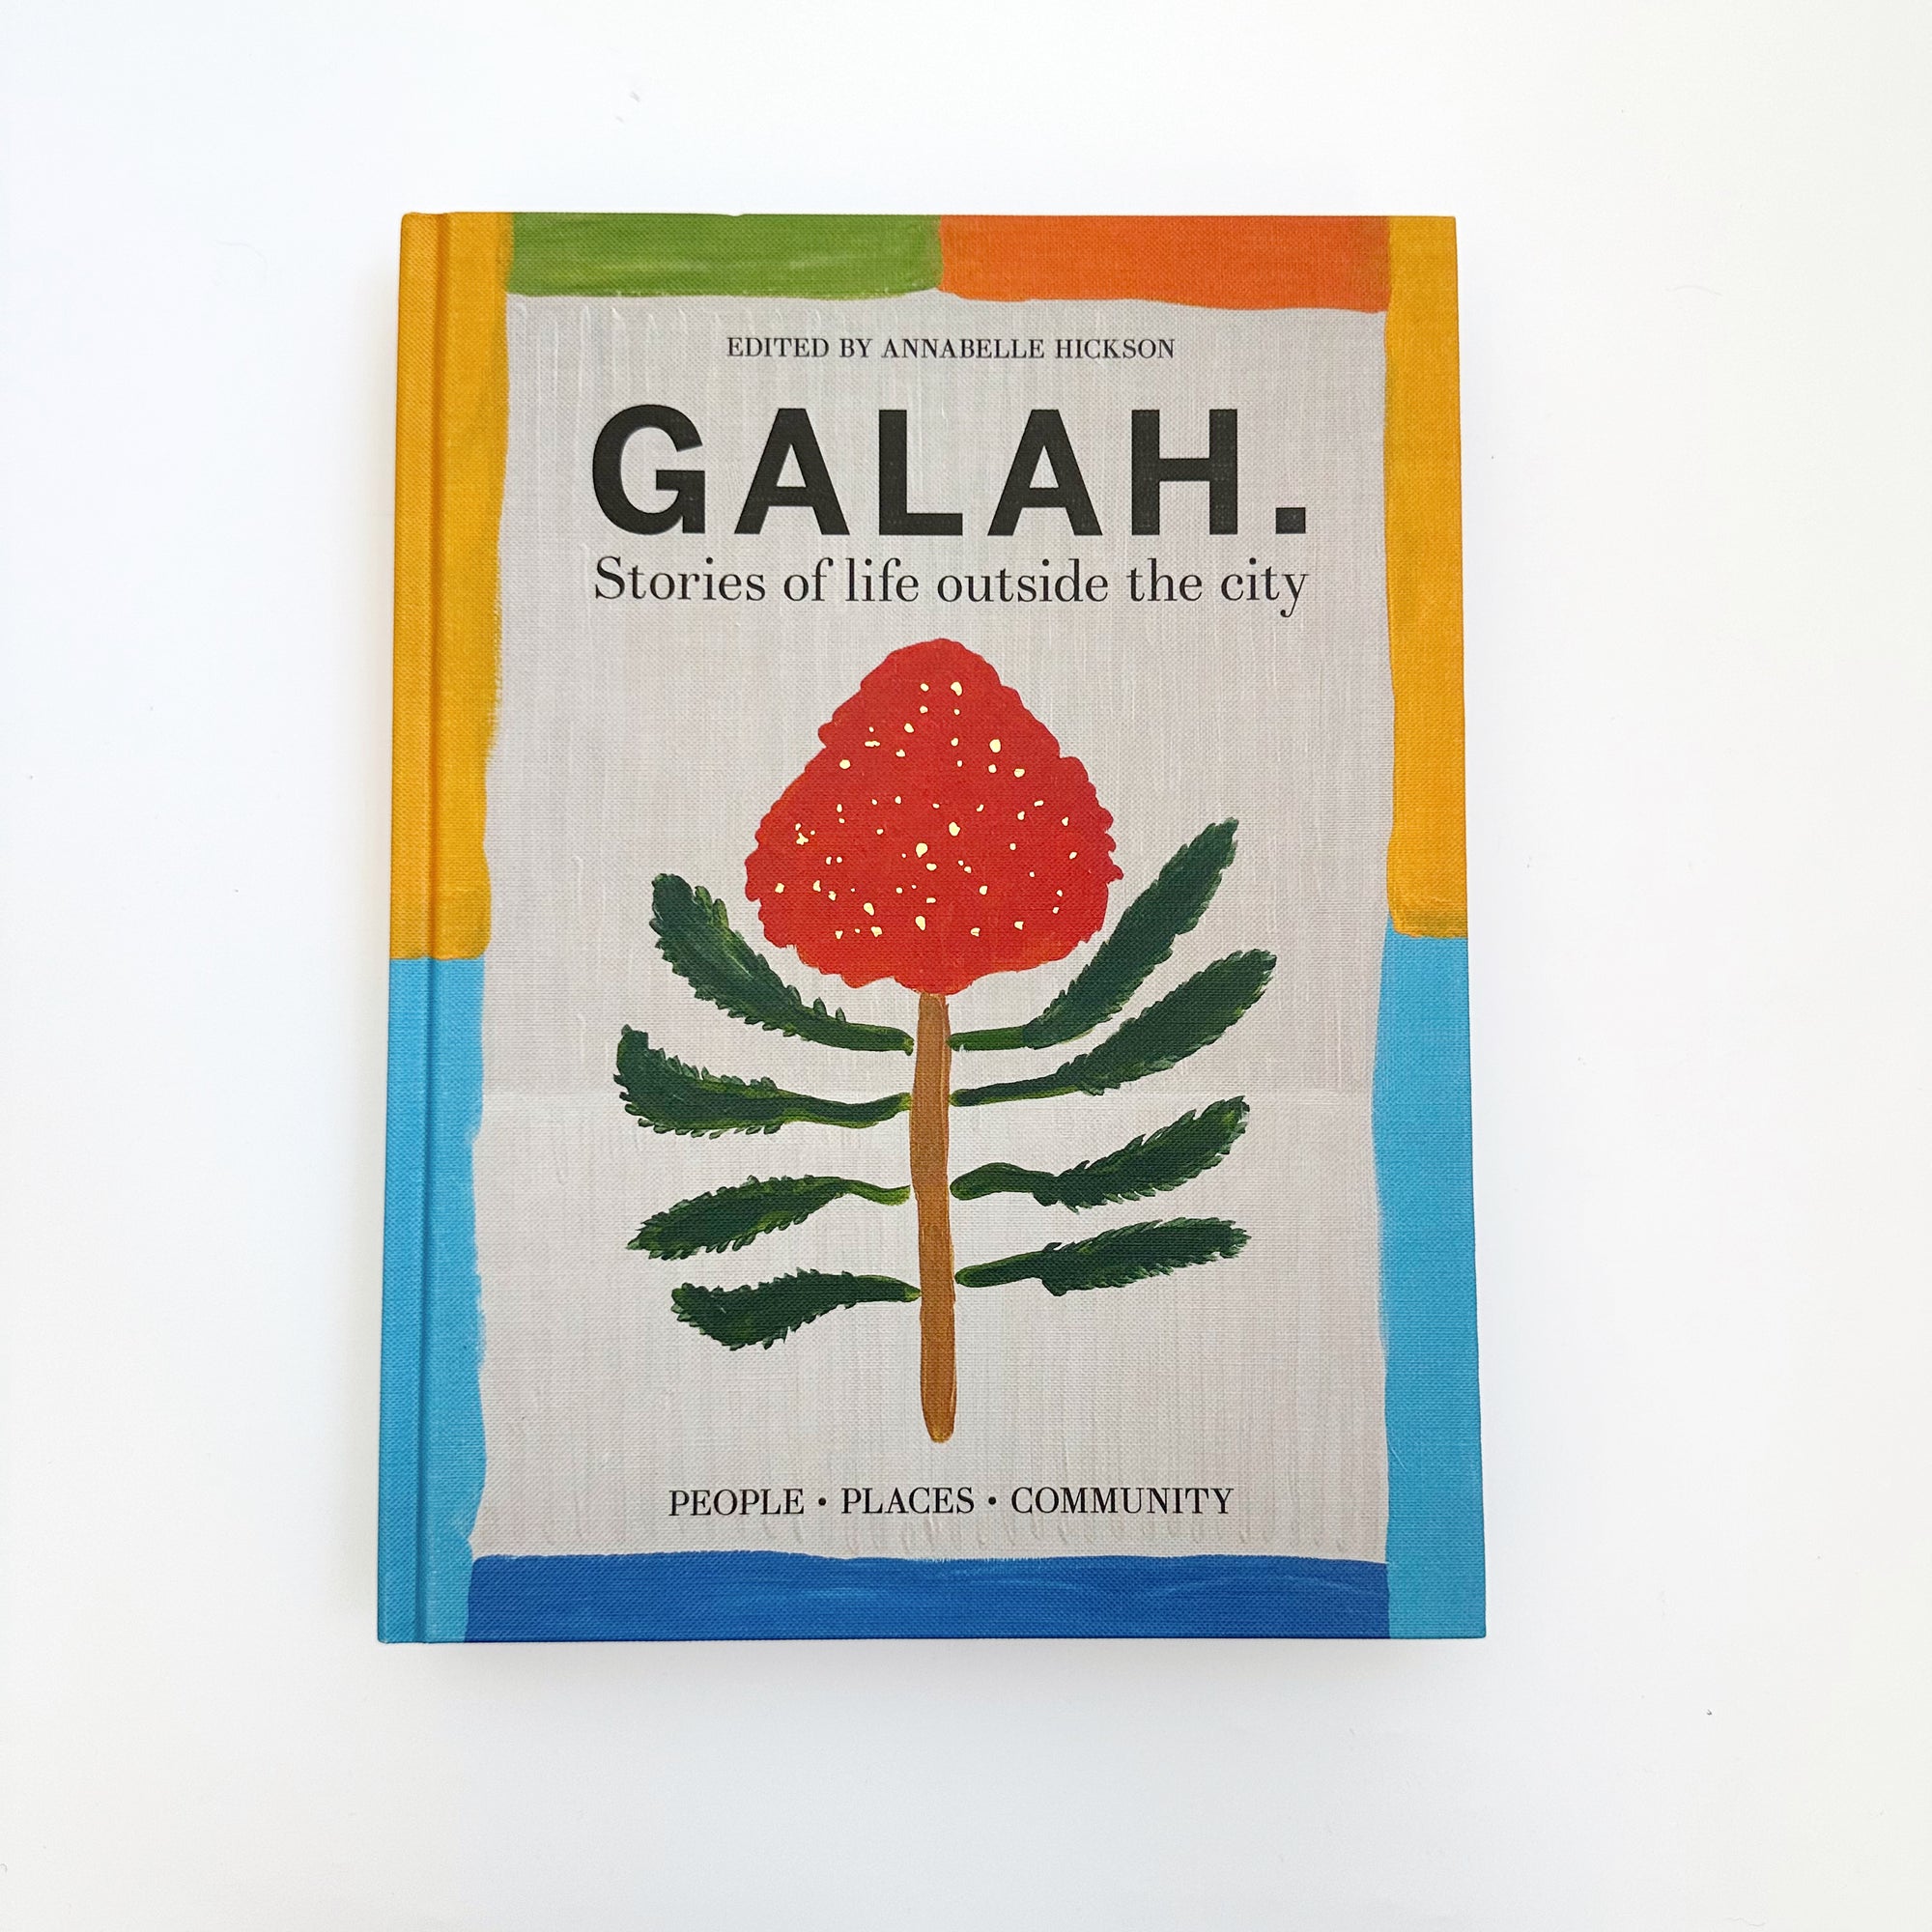 GALAH: STORIES OF LIFE OUTSIDE THE CITY